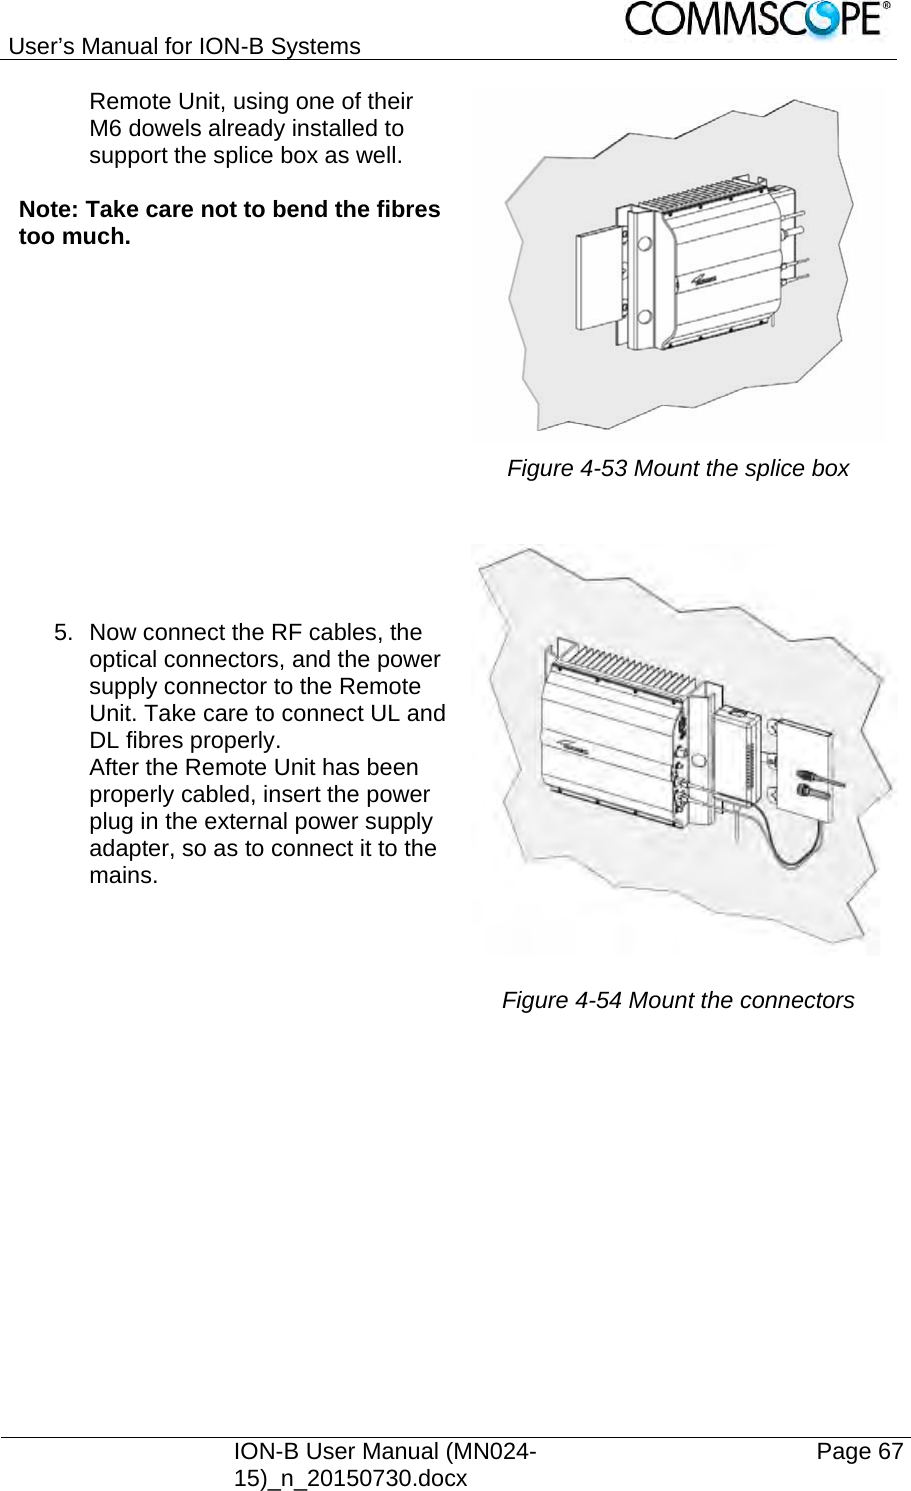 User’s Manual for ION-B Systems    ION-B User Manual (MN024-15)_n_20150730.docx  Page 67 Remote Unit, using one of their M6 dowels already installed to support the splice box as well.  Note: Take care not to bend the fibres too much.   Figure 4-53 Mount the splice box  5.  Now connect the RF cables, the optical connectors, and the power supply connector to the Remote Unit. Take care to connect UL and DL fibres properly. After the Remote Unit has been properly cabled, insert the power plug in the external power supply adapter, so as to connect it to the mains.  Figure 4-54 Mount the connectors 